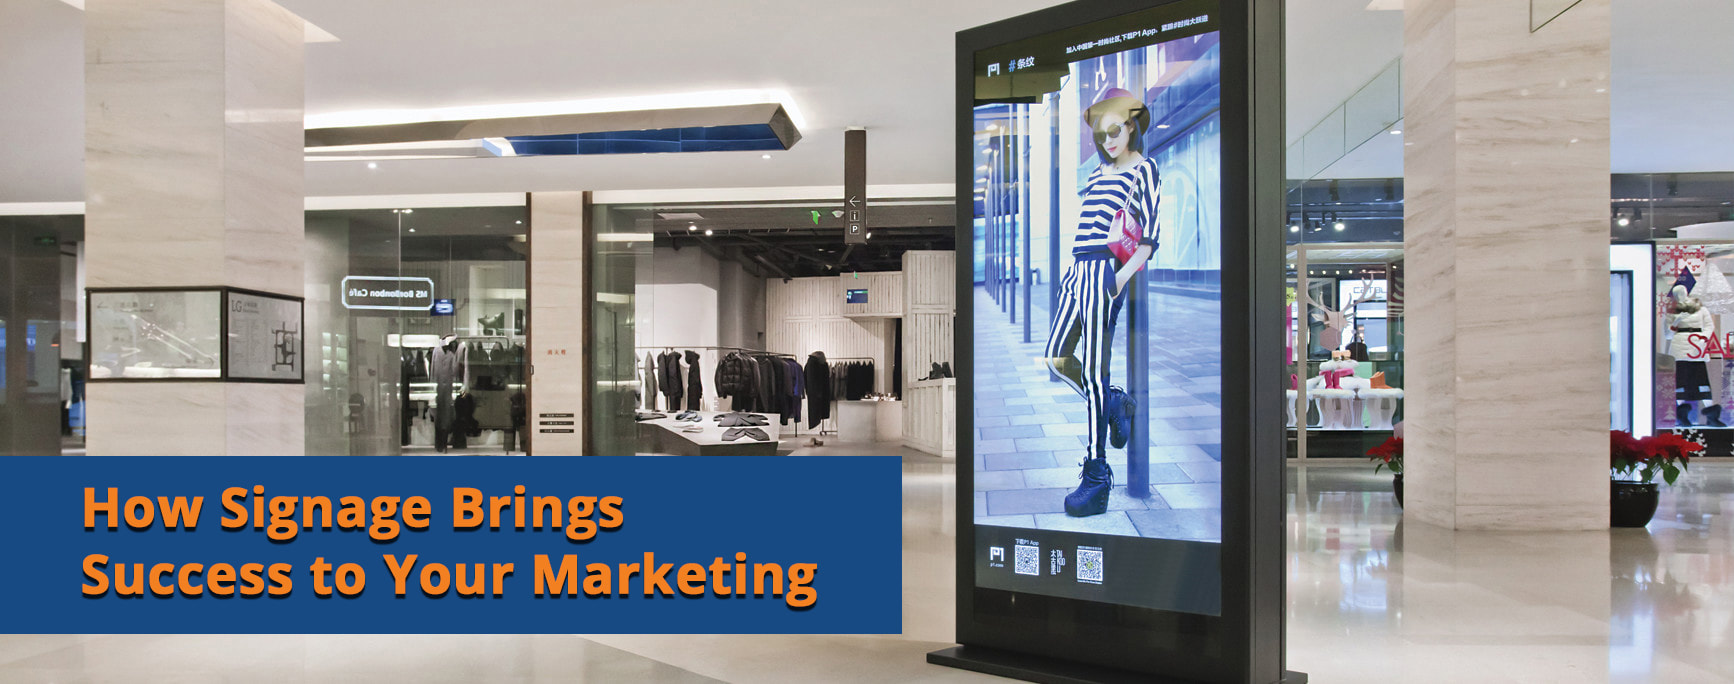 How Signage Brings Success to Your Marketing